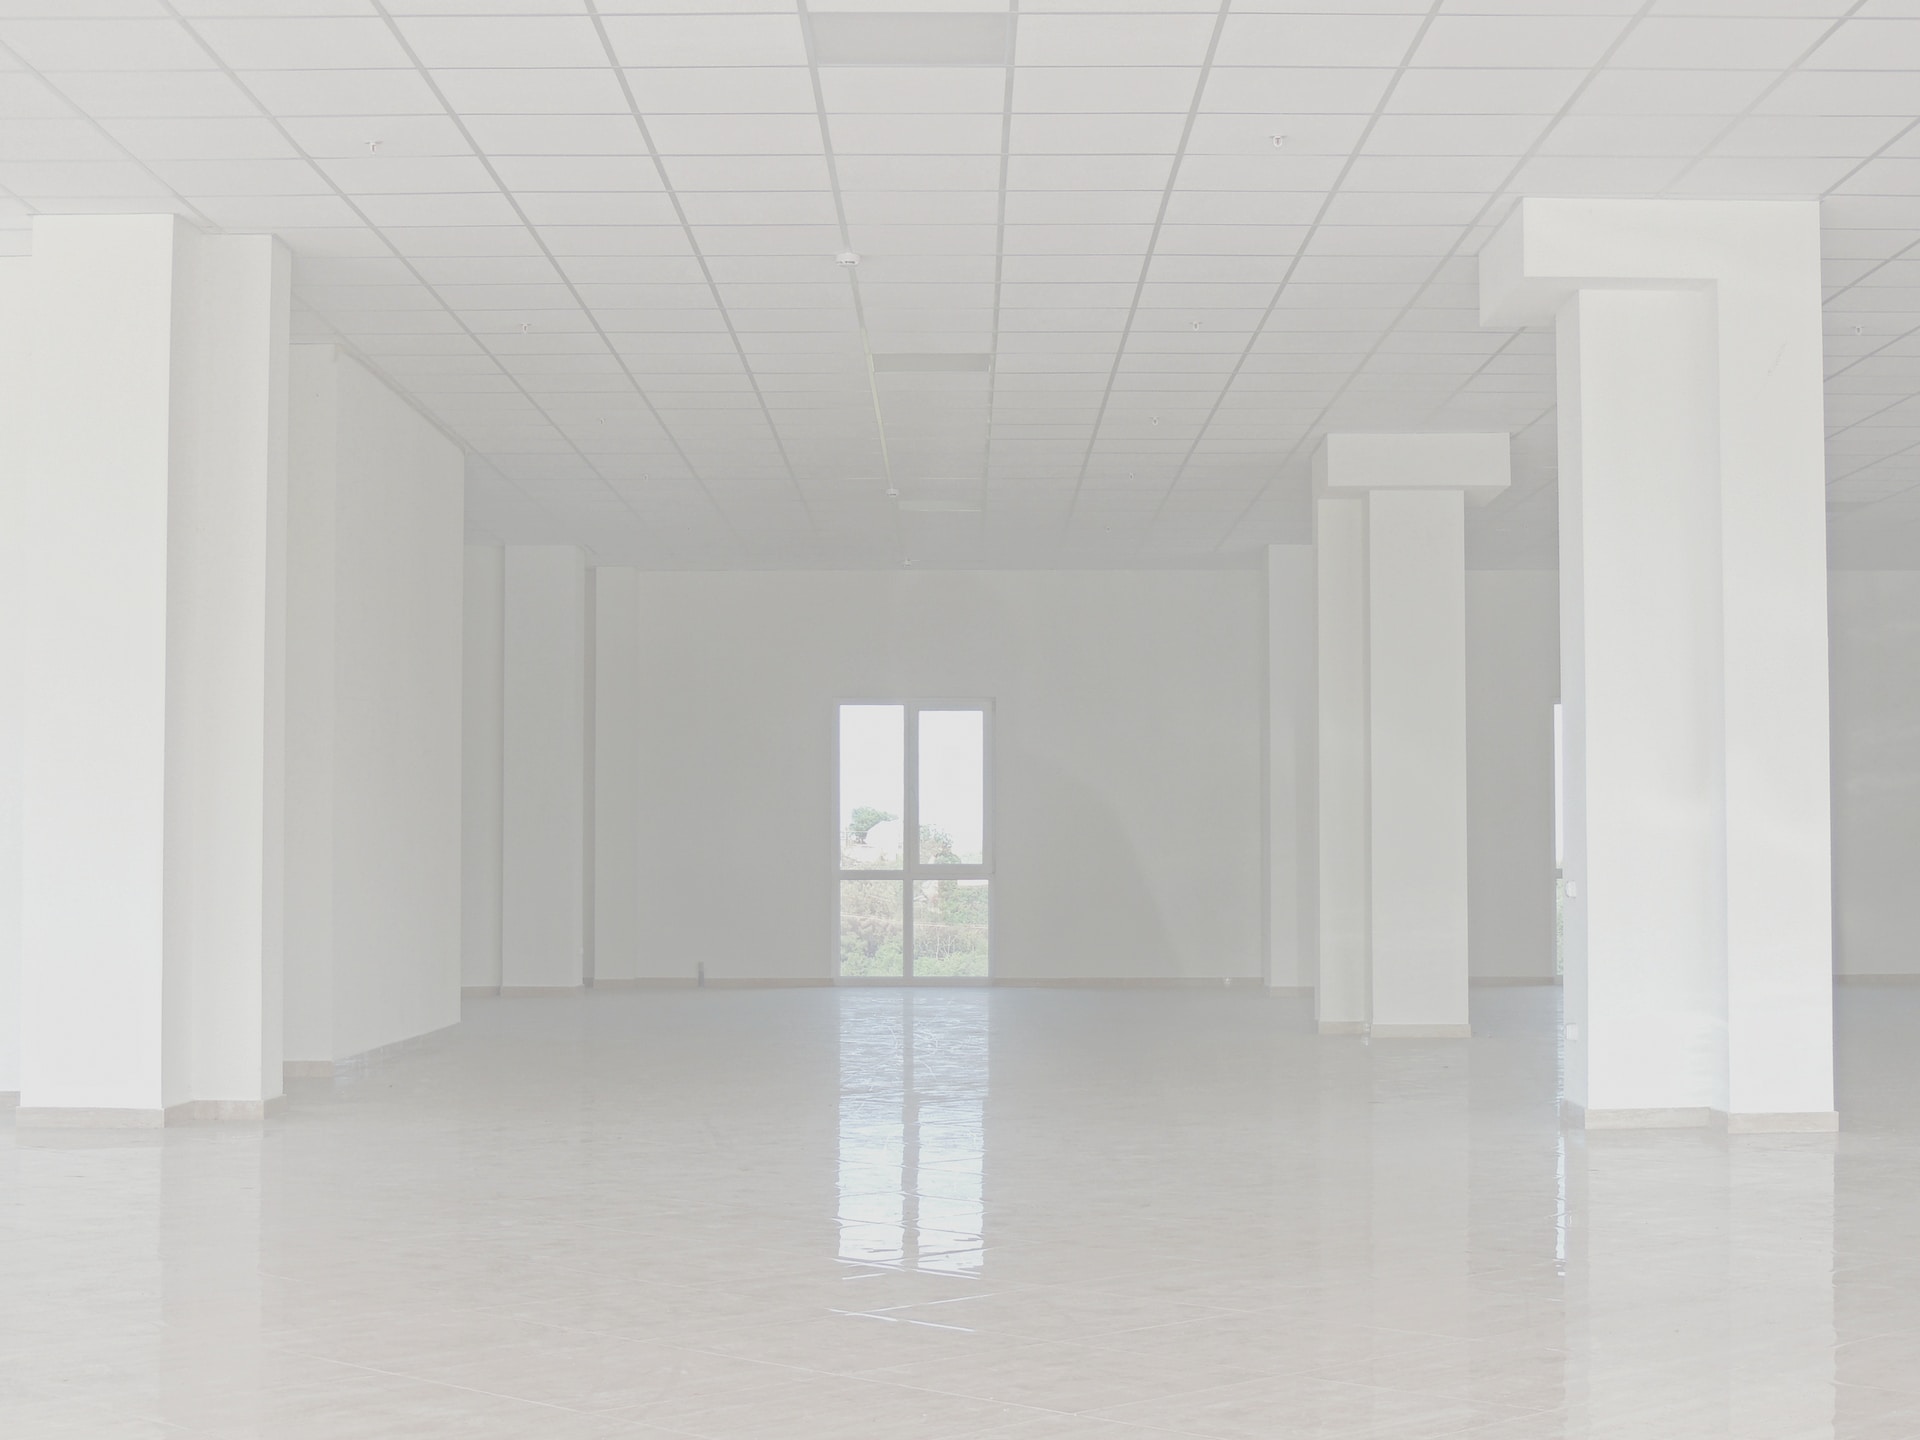 A faded image of empty floors and white walls. A two pane window is directly across the room from the viewer.